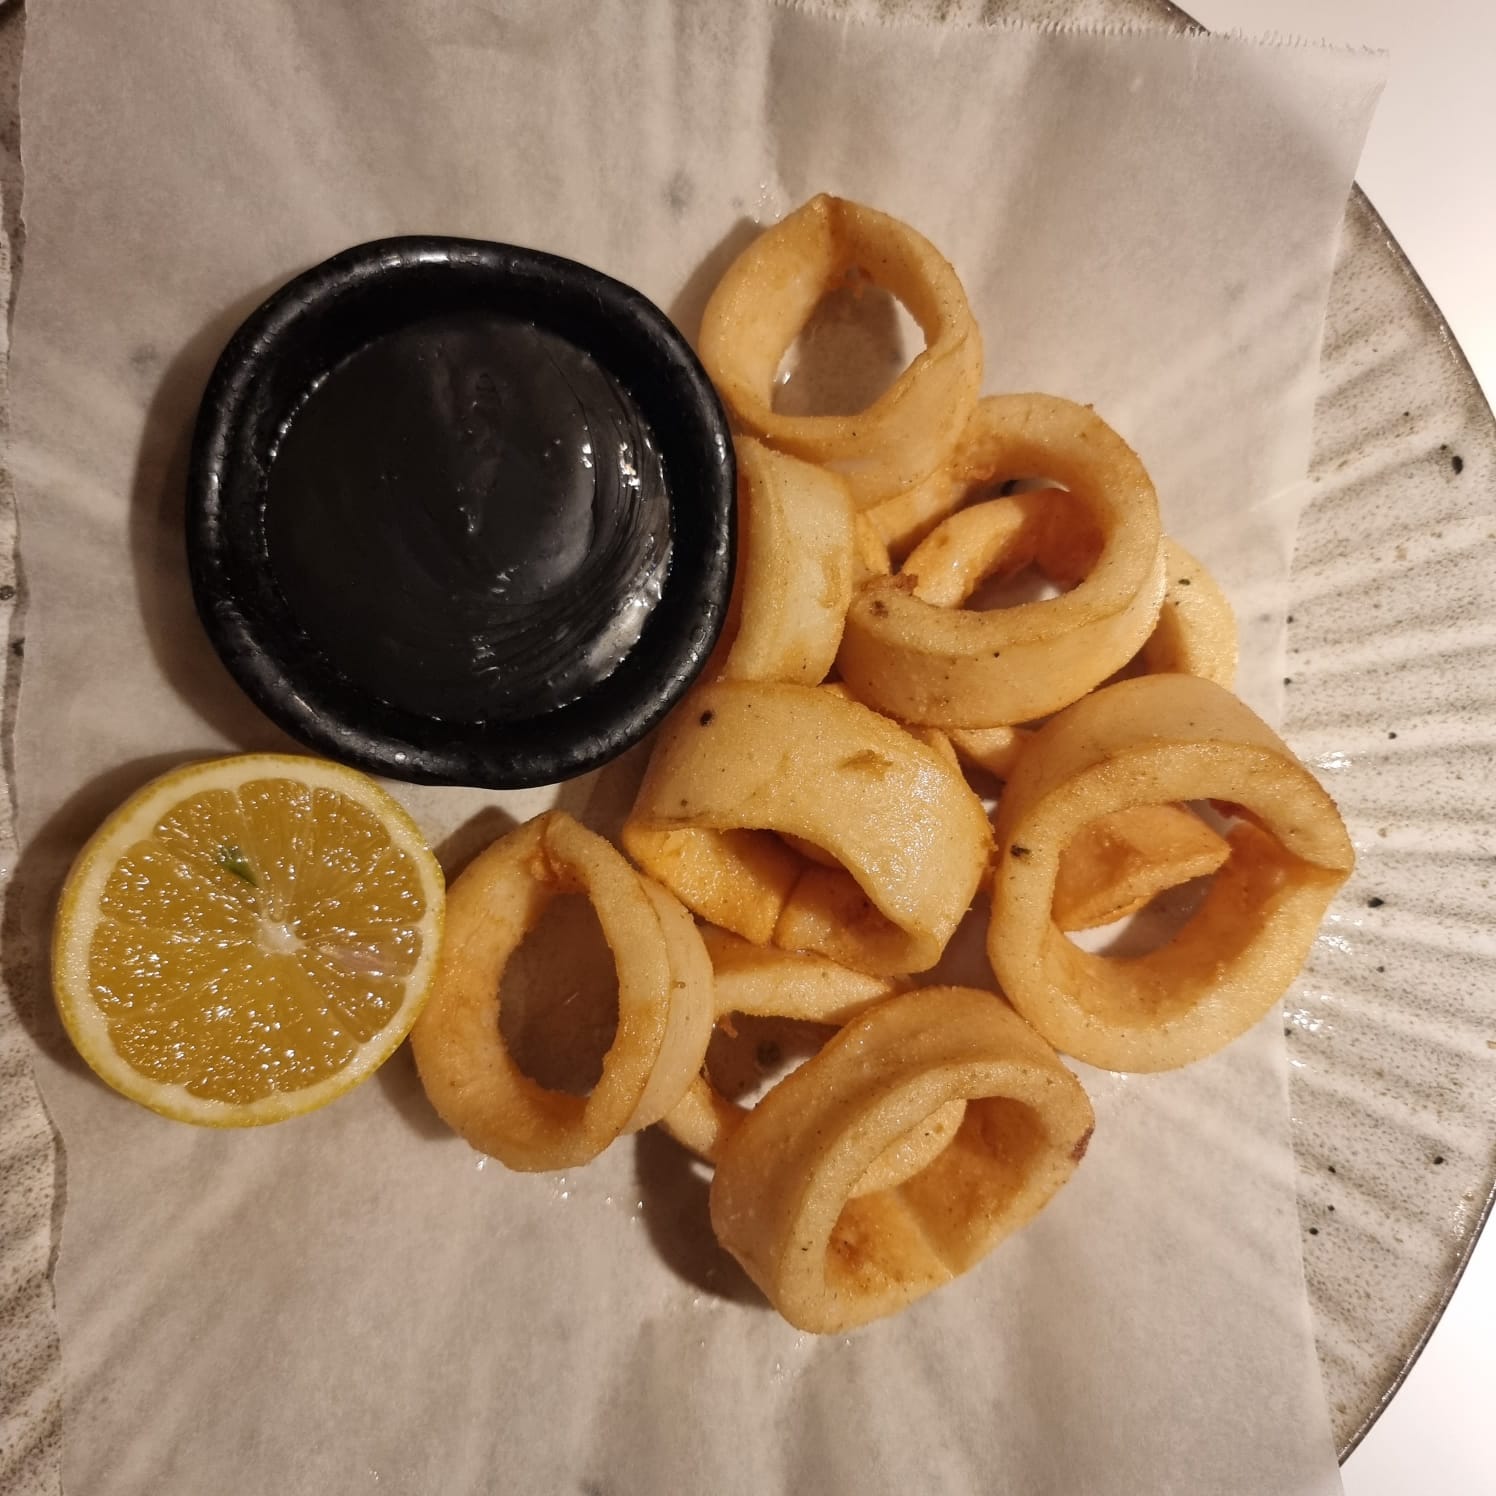 Fried squid with aioli in its ink